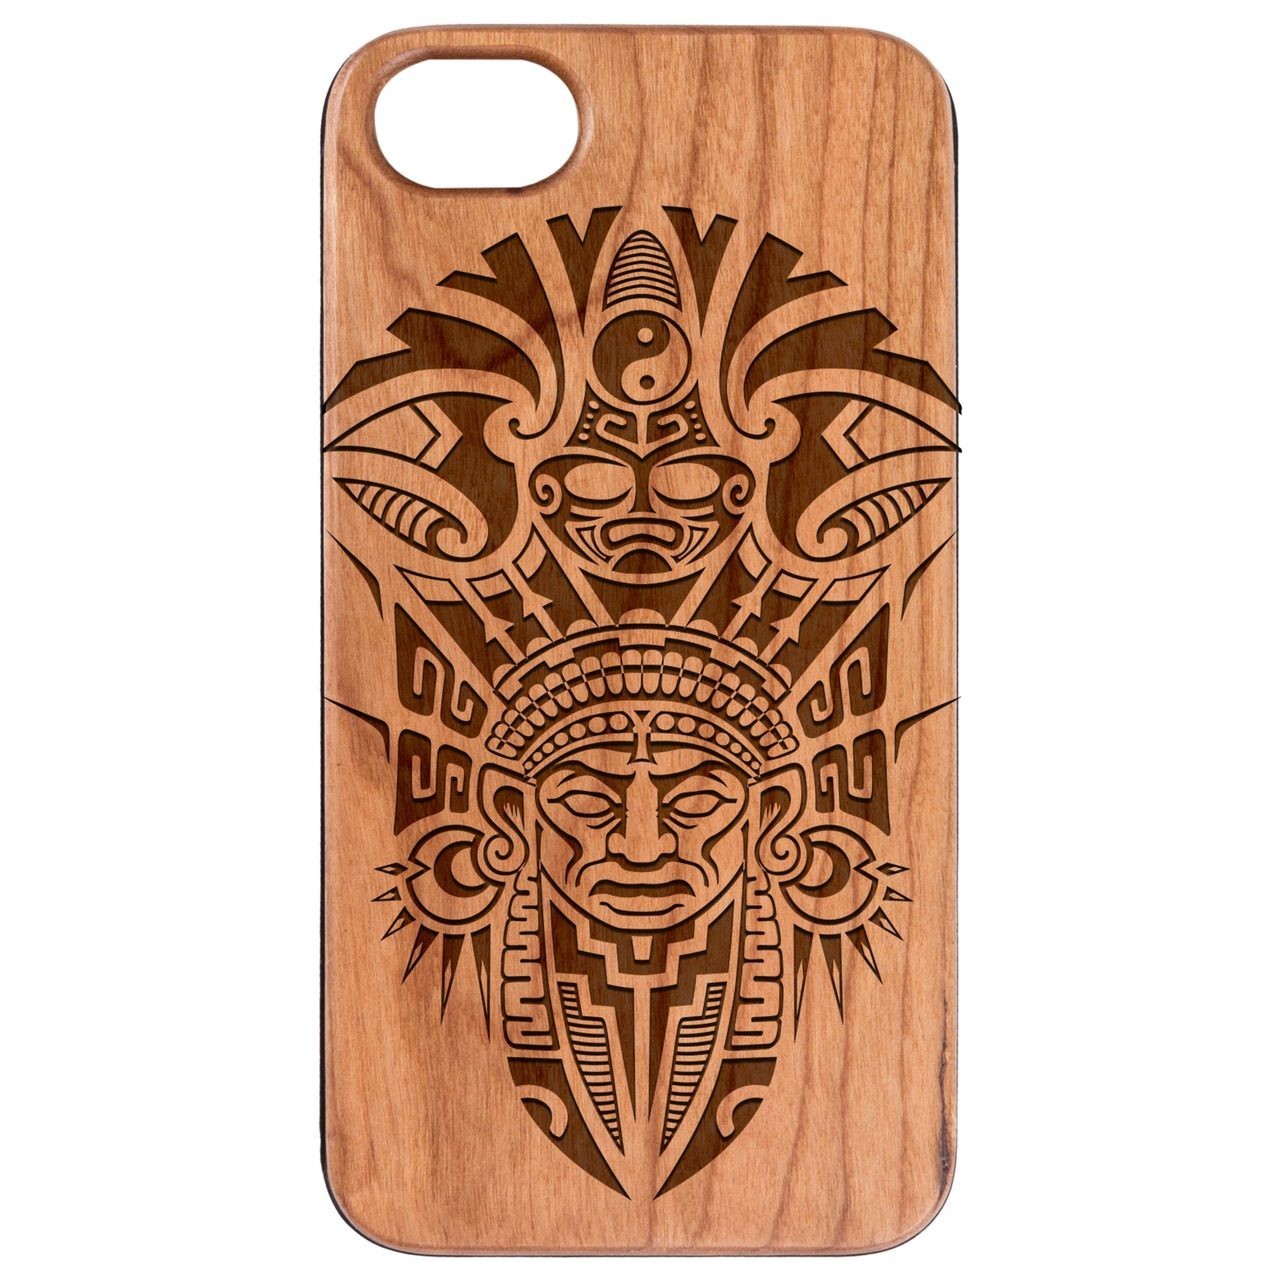  Indian Mask - Engraved - Wooden Phone Case - IPhone 13 Models